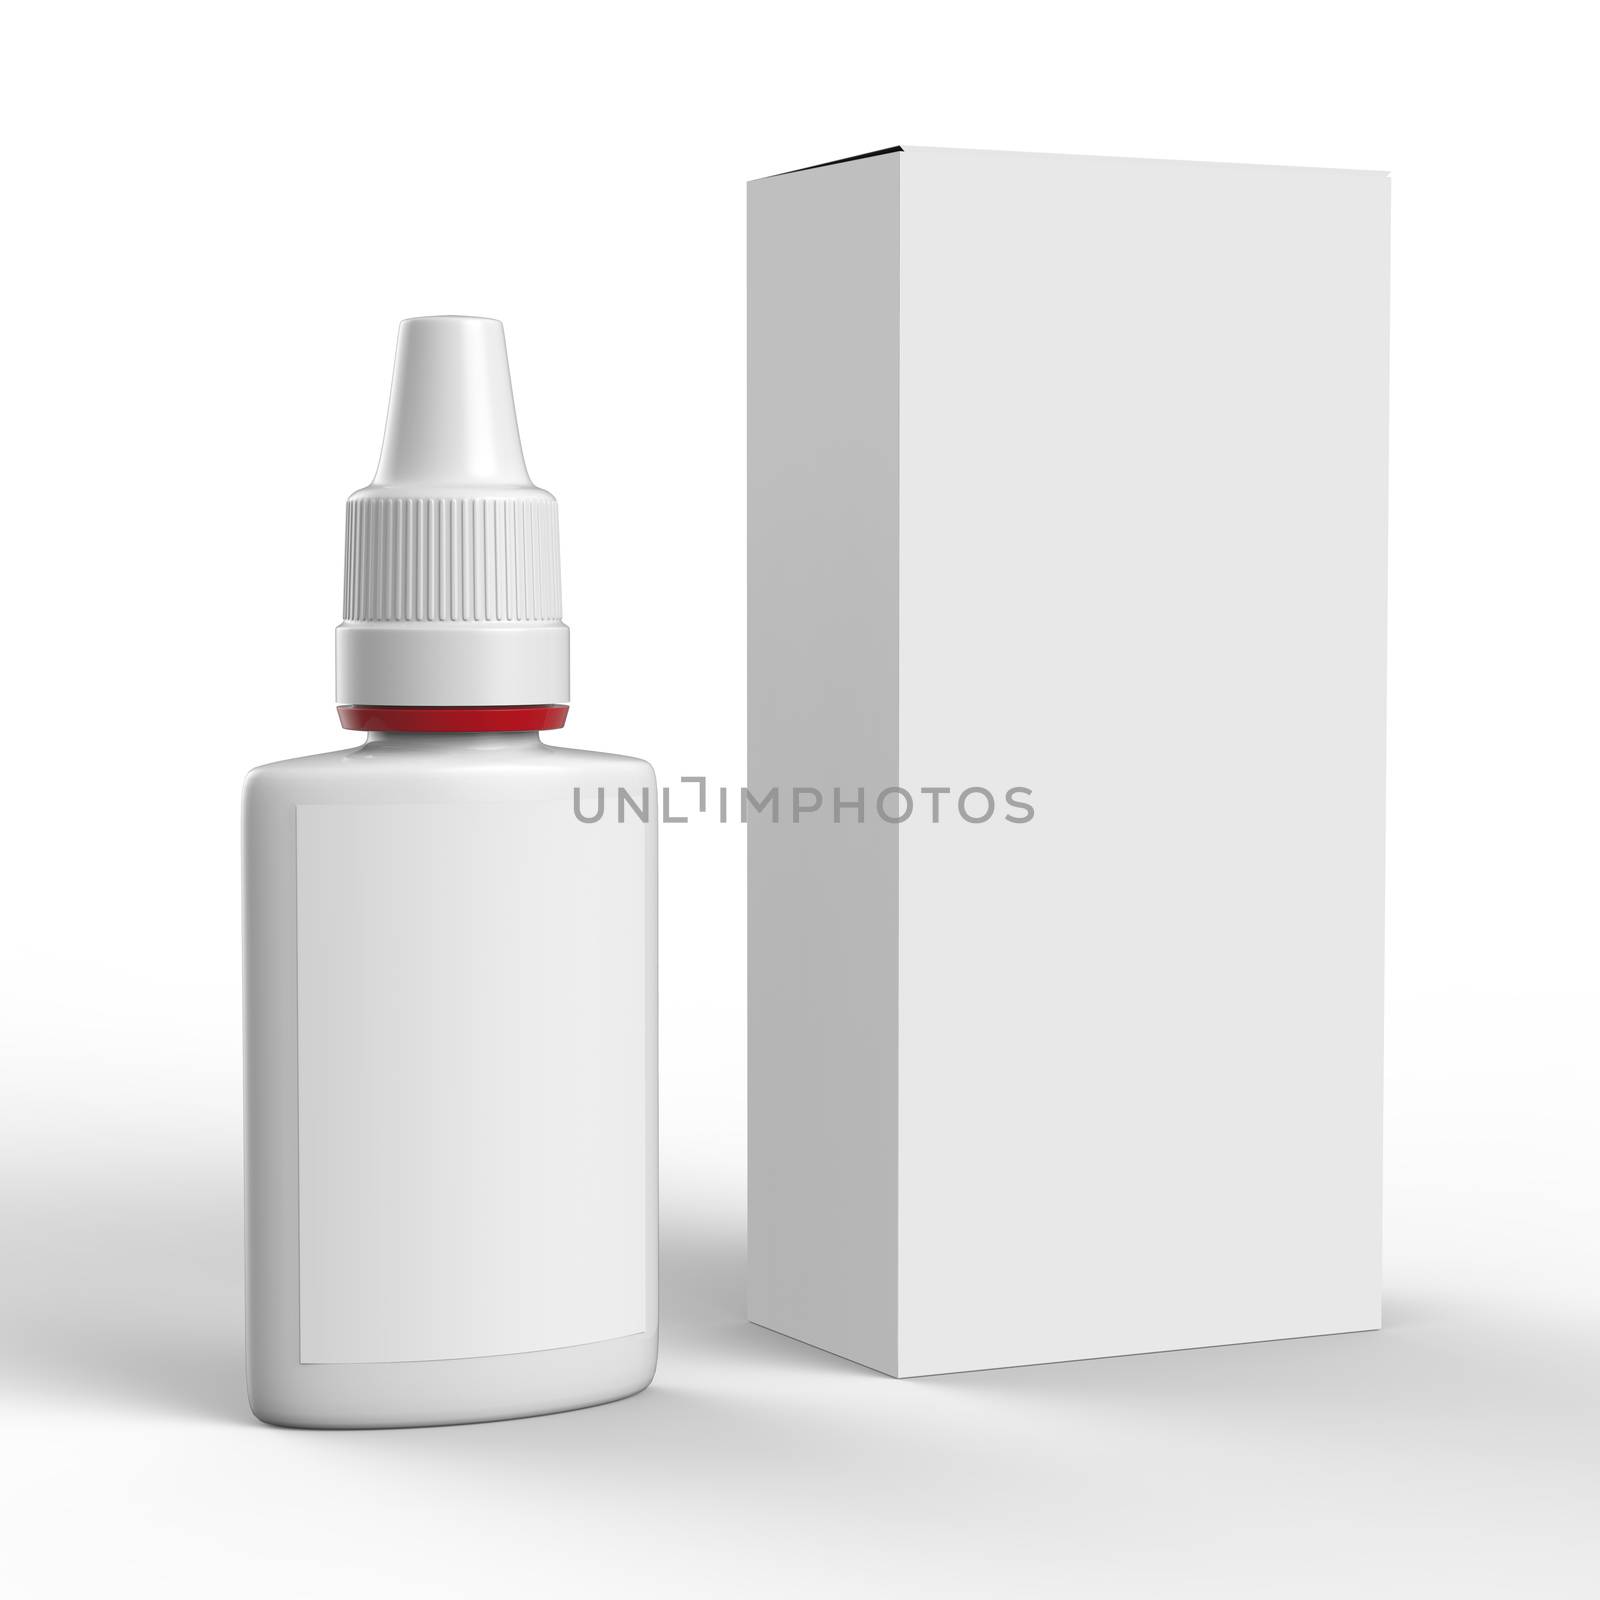 Clean mockup of nasal spray bottle and box isolated on white background. Ready For Your Design.